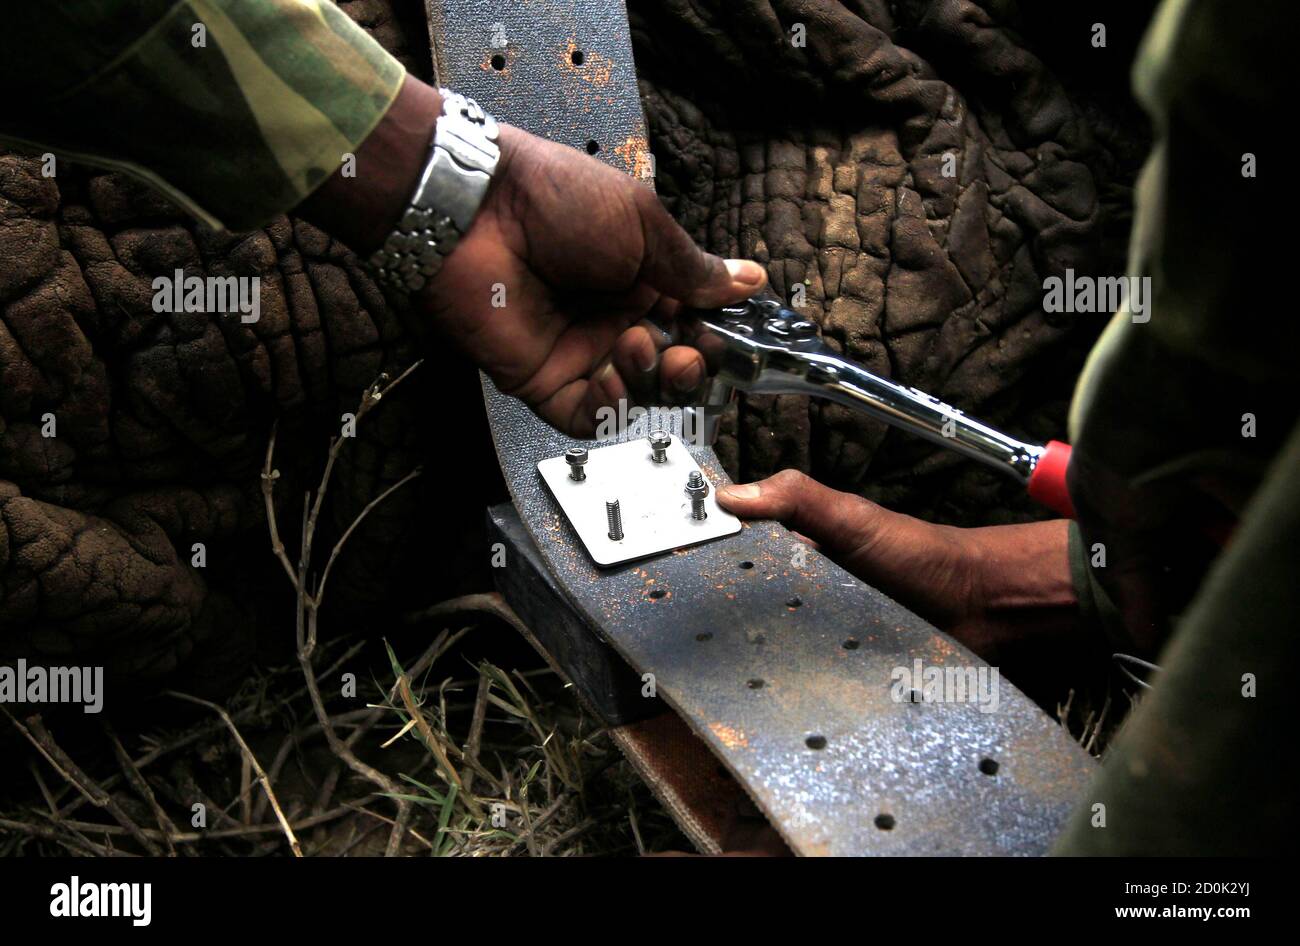 Kenya Wildlife Services (KWS) personnel secures an electronic data collar on an immobilized male elephant south of Kajiado 120km (75 Miles) south of capital Nairobi, December 3, 2013. The wildlife body is collaring elephants along the Amboseli ecosystem to monitor movement patterns of the animals due to shrinking land availability with the ever increasing human settlement. REUTERS/Noor Khamis (KENYA - Tags: ENVIRONMENT SOCIETY SCIENCE TECHNOLOGY ANIMALS) Stock Photo